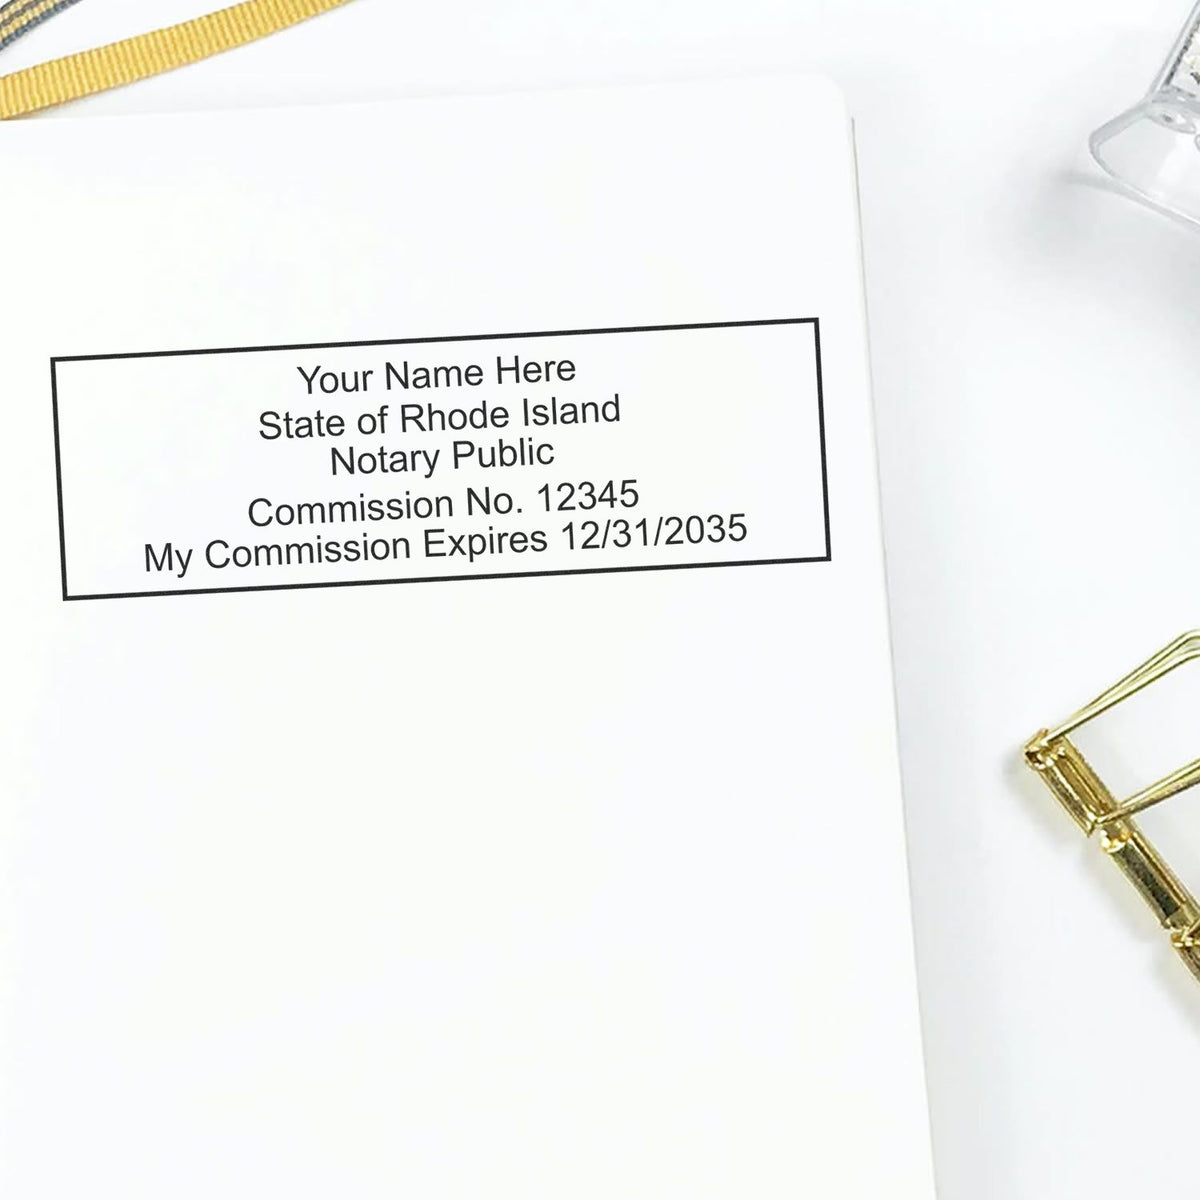 An alternative view of the PSI Rhode Island Notary Stamp stamped on a sheet of paper showing the image in use